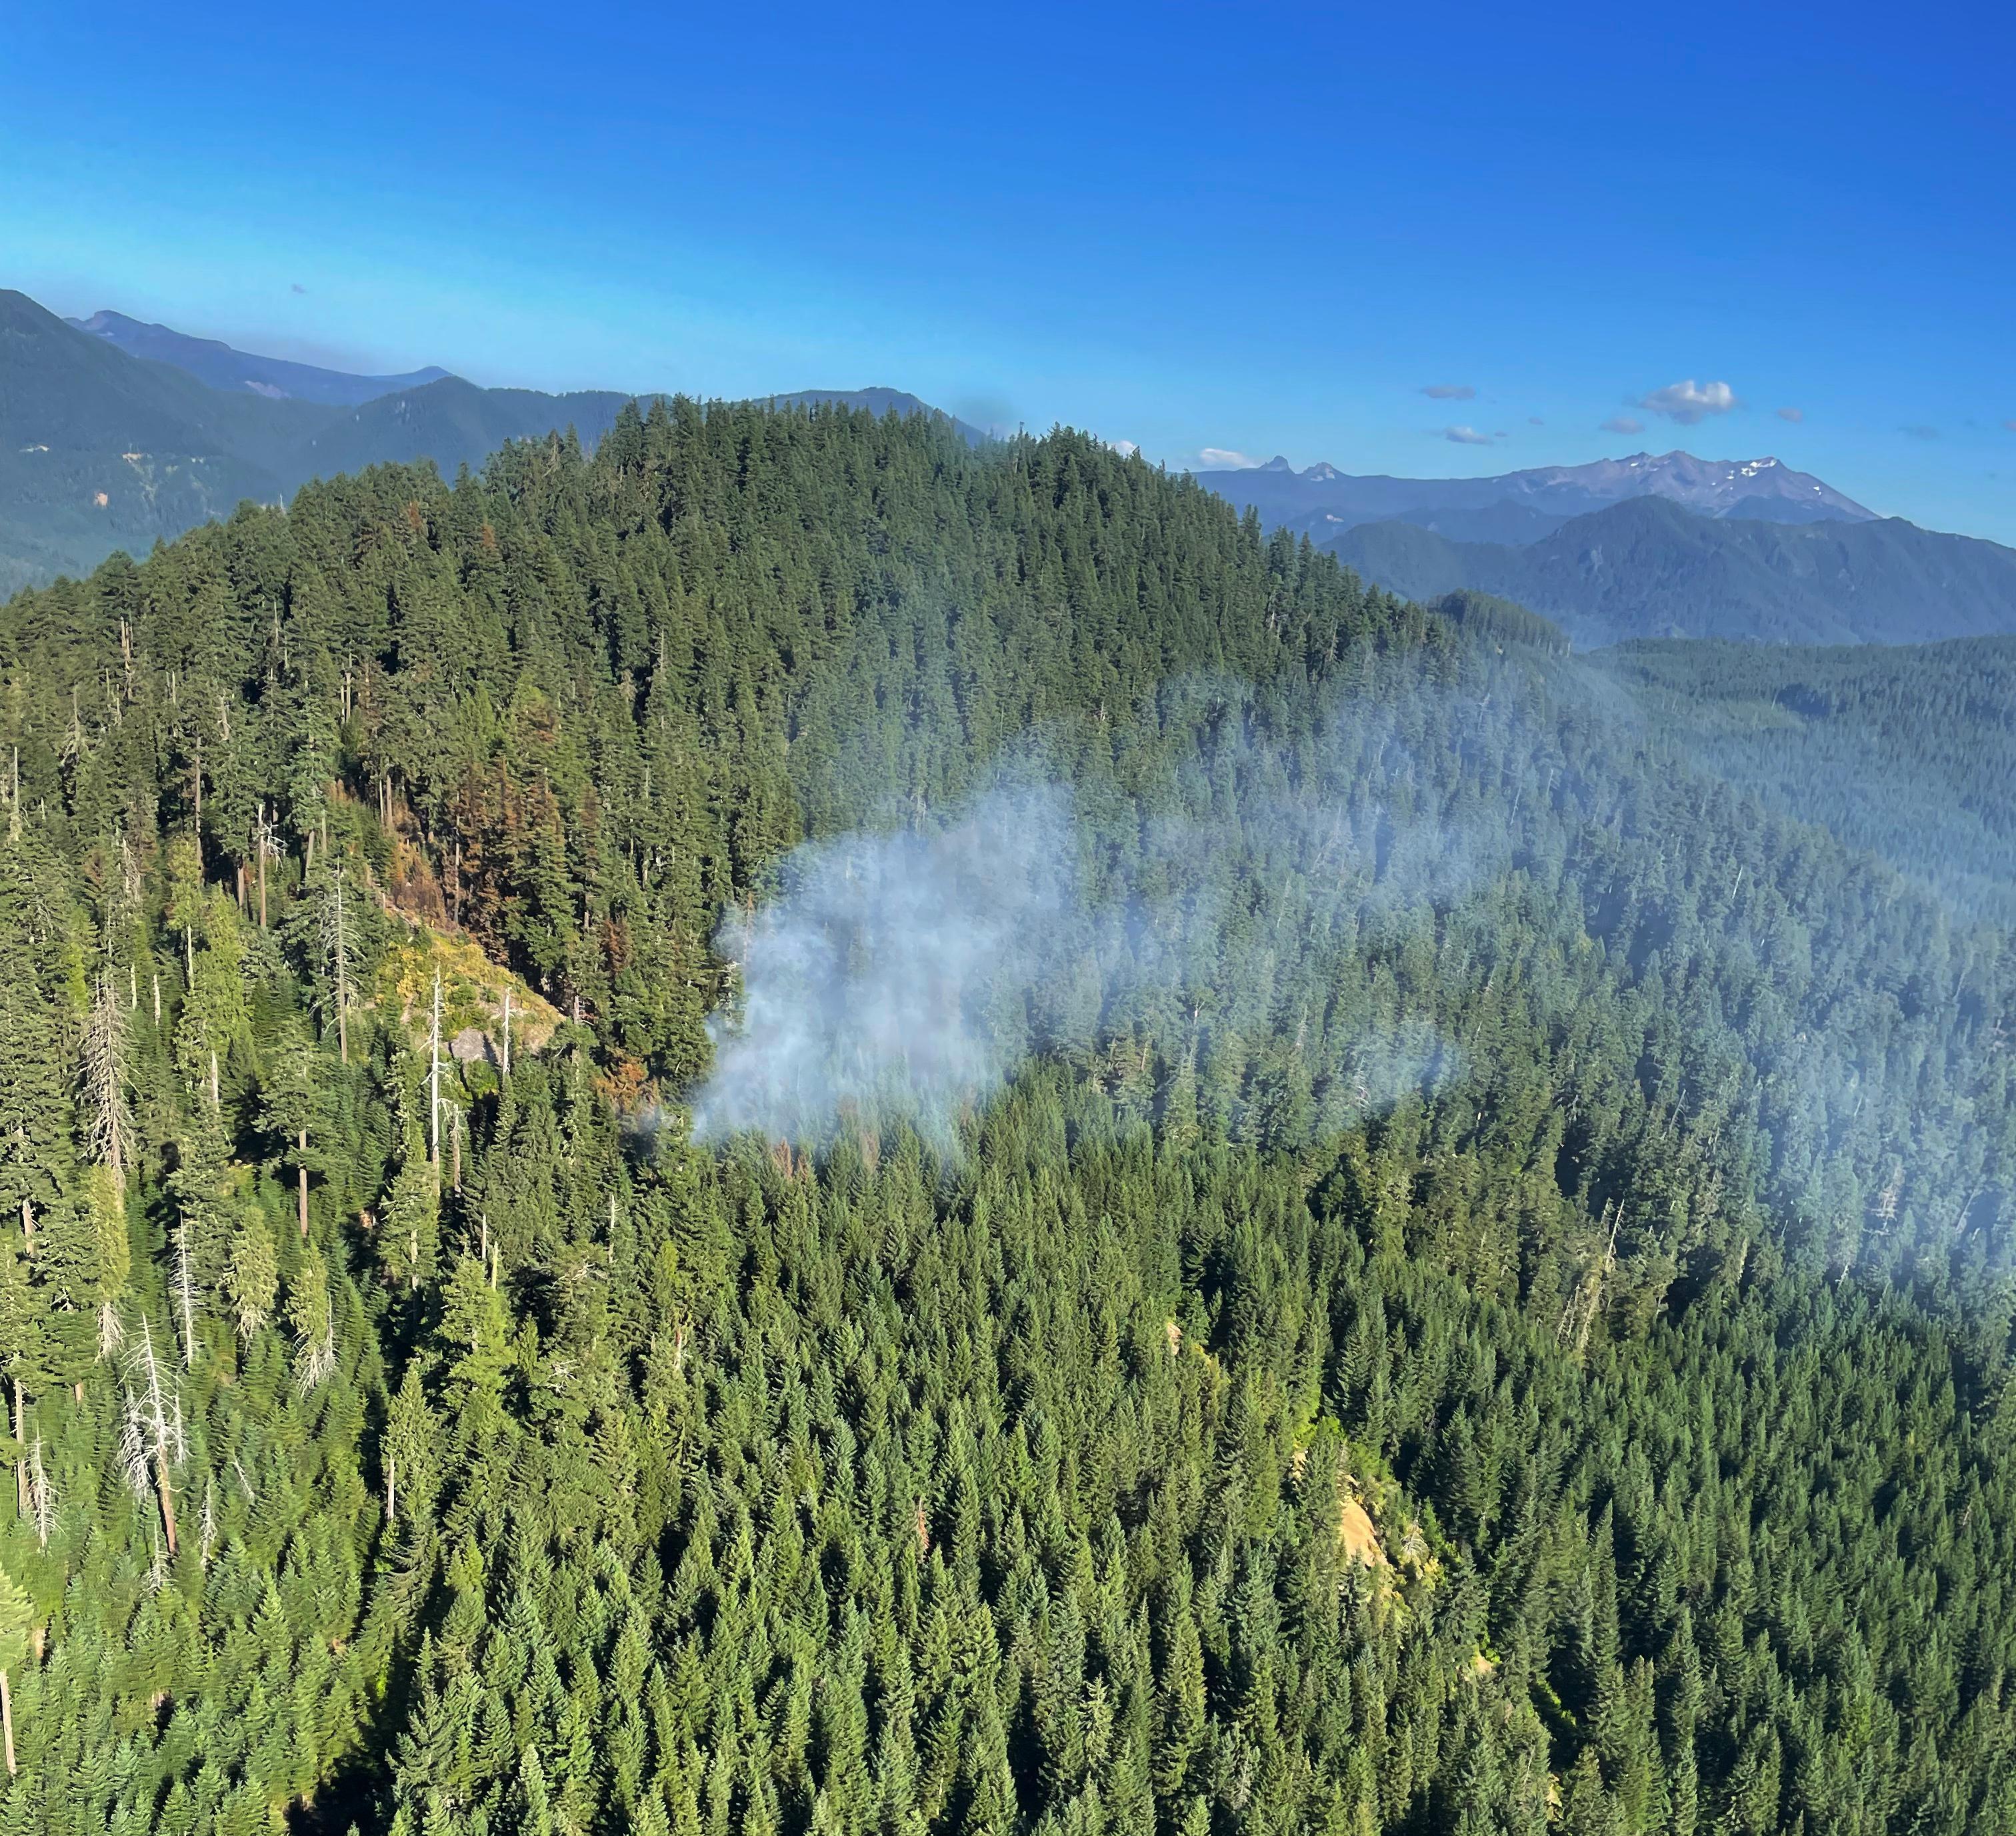 An aerial view of a small fire in a forest. Volacanic mountains with snow can be seen against a blue sky backdrop in the distance.